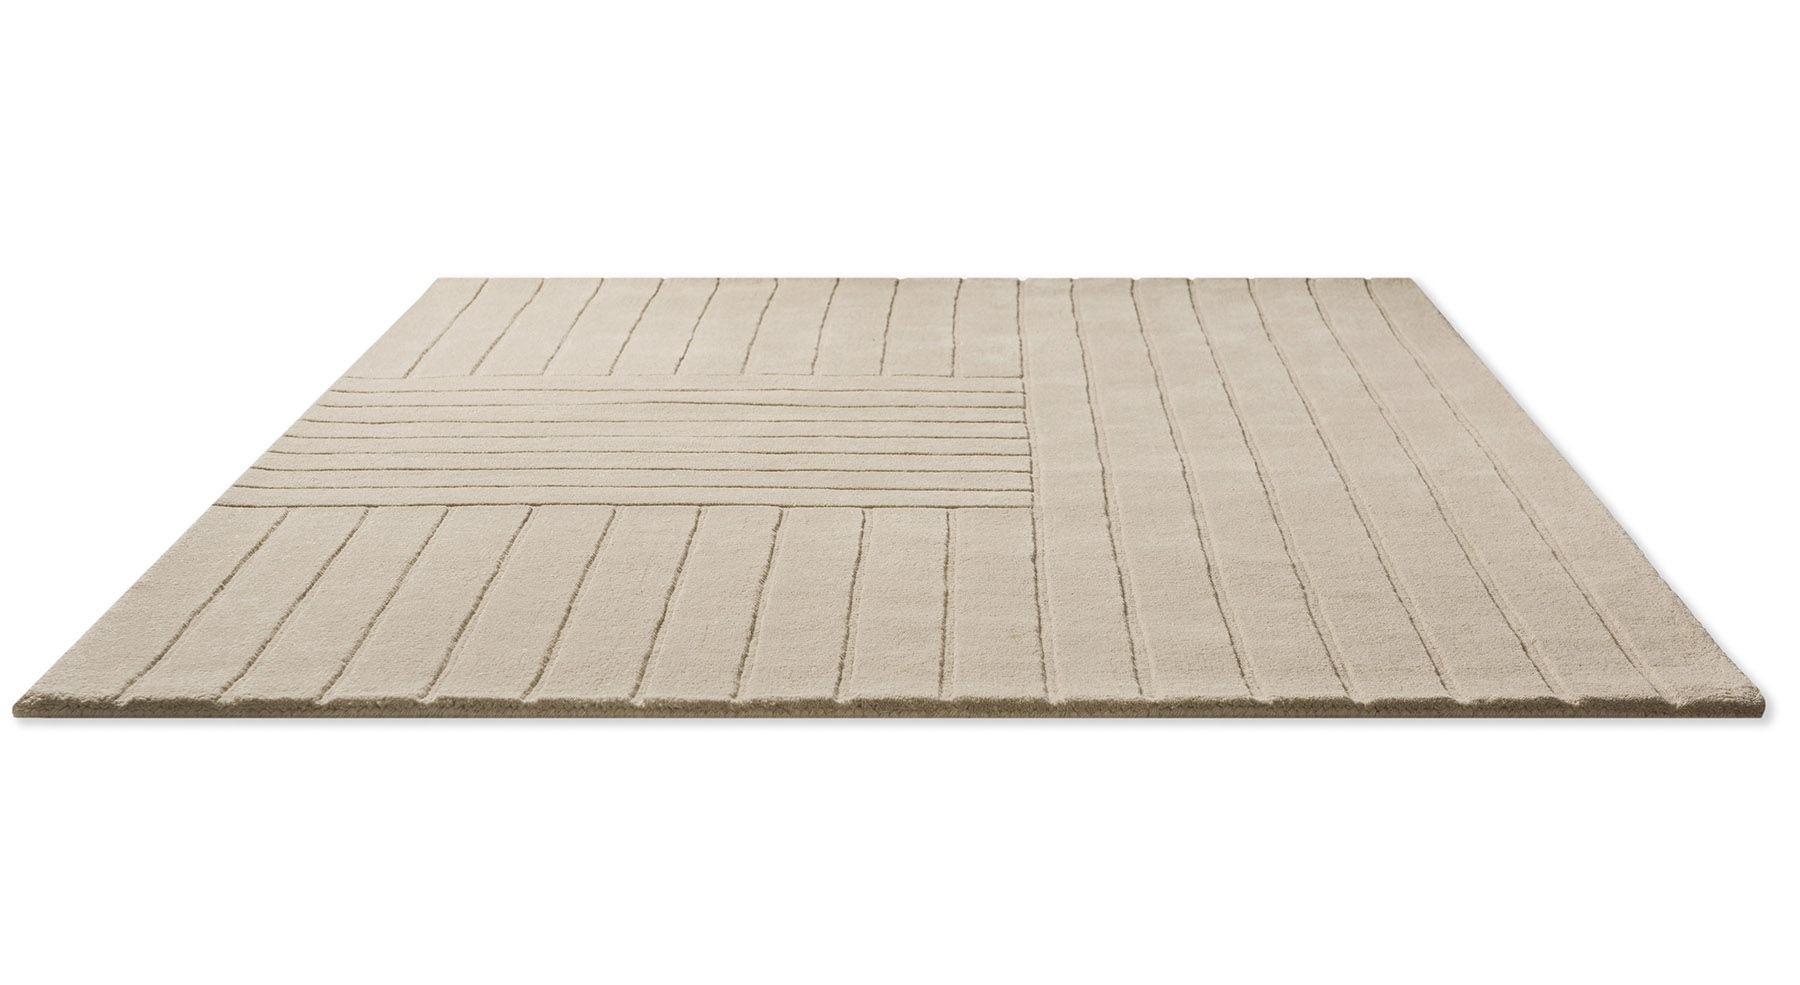 Decor Dune Oyster Handwoven Rug ☞ Size: 6' 7" x 9' 2" (200 x 280 cm)